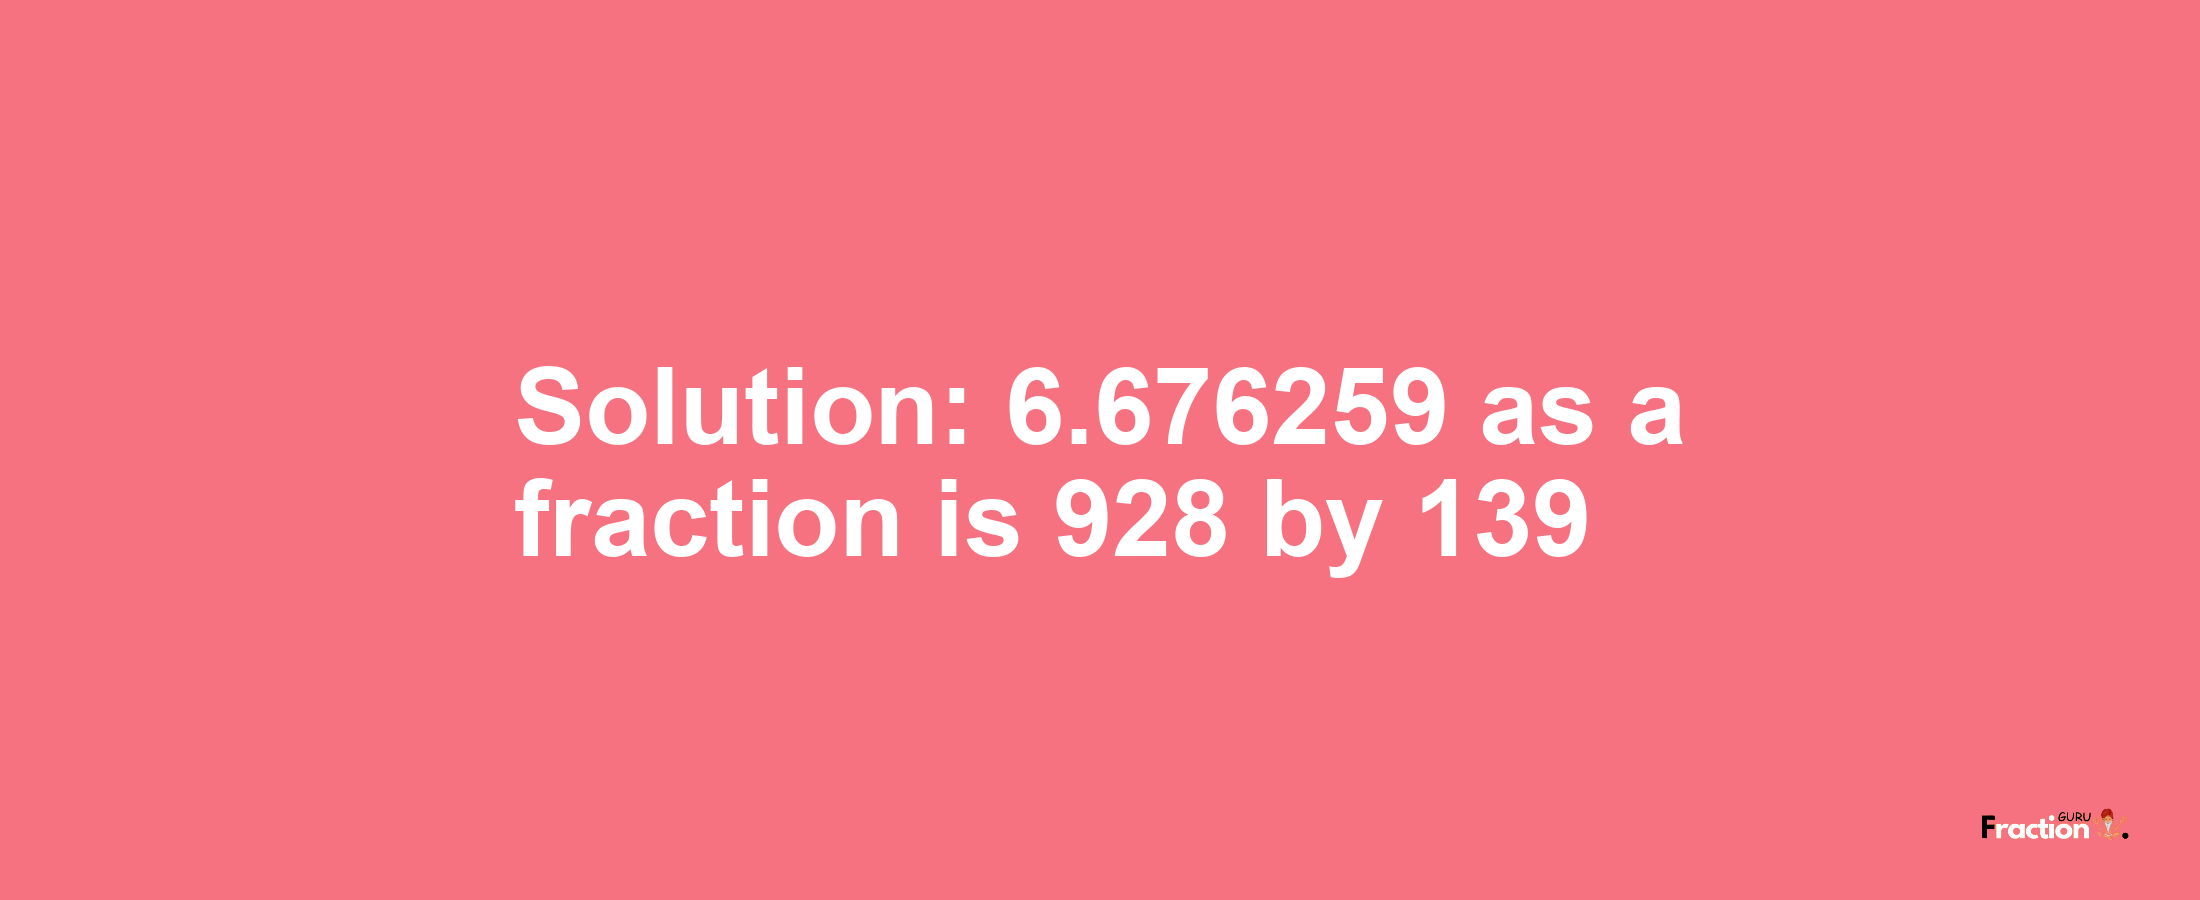 Solution:6.676259 as a fraction is 928/139